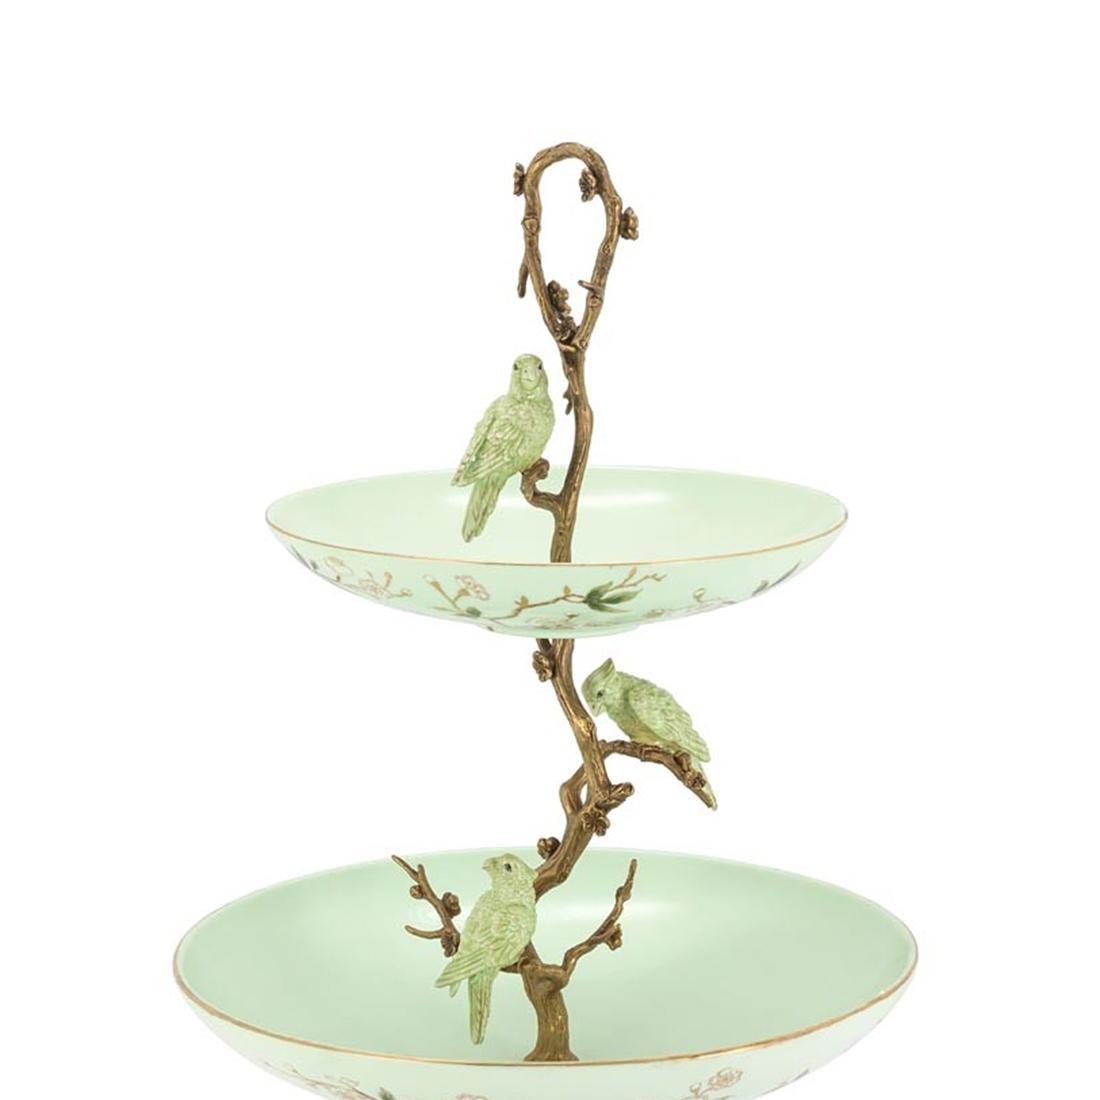 Center table serving piece birdy with
2 plates and base in hand painted enameled
porcelain. With solid bronze structure and details.